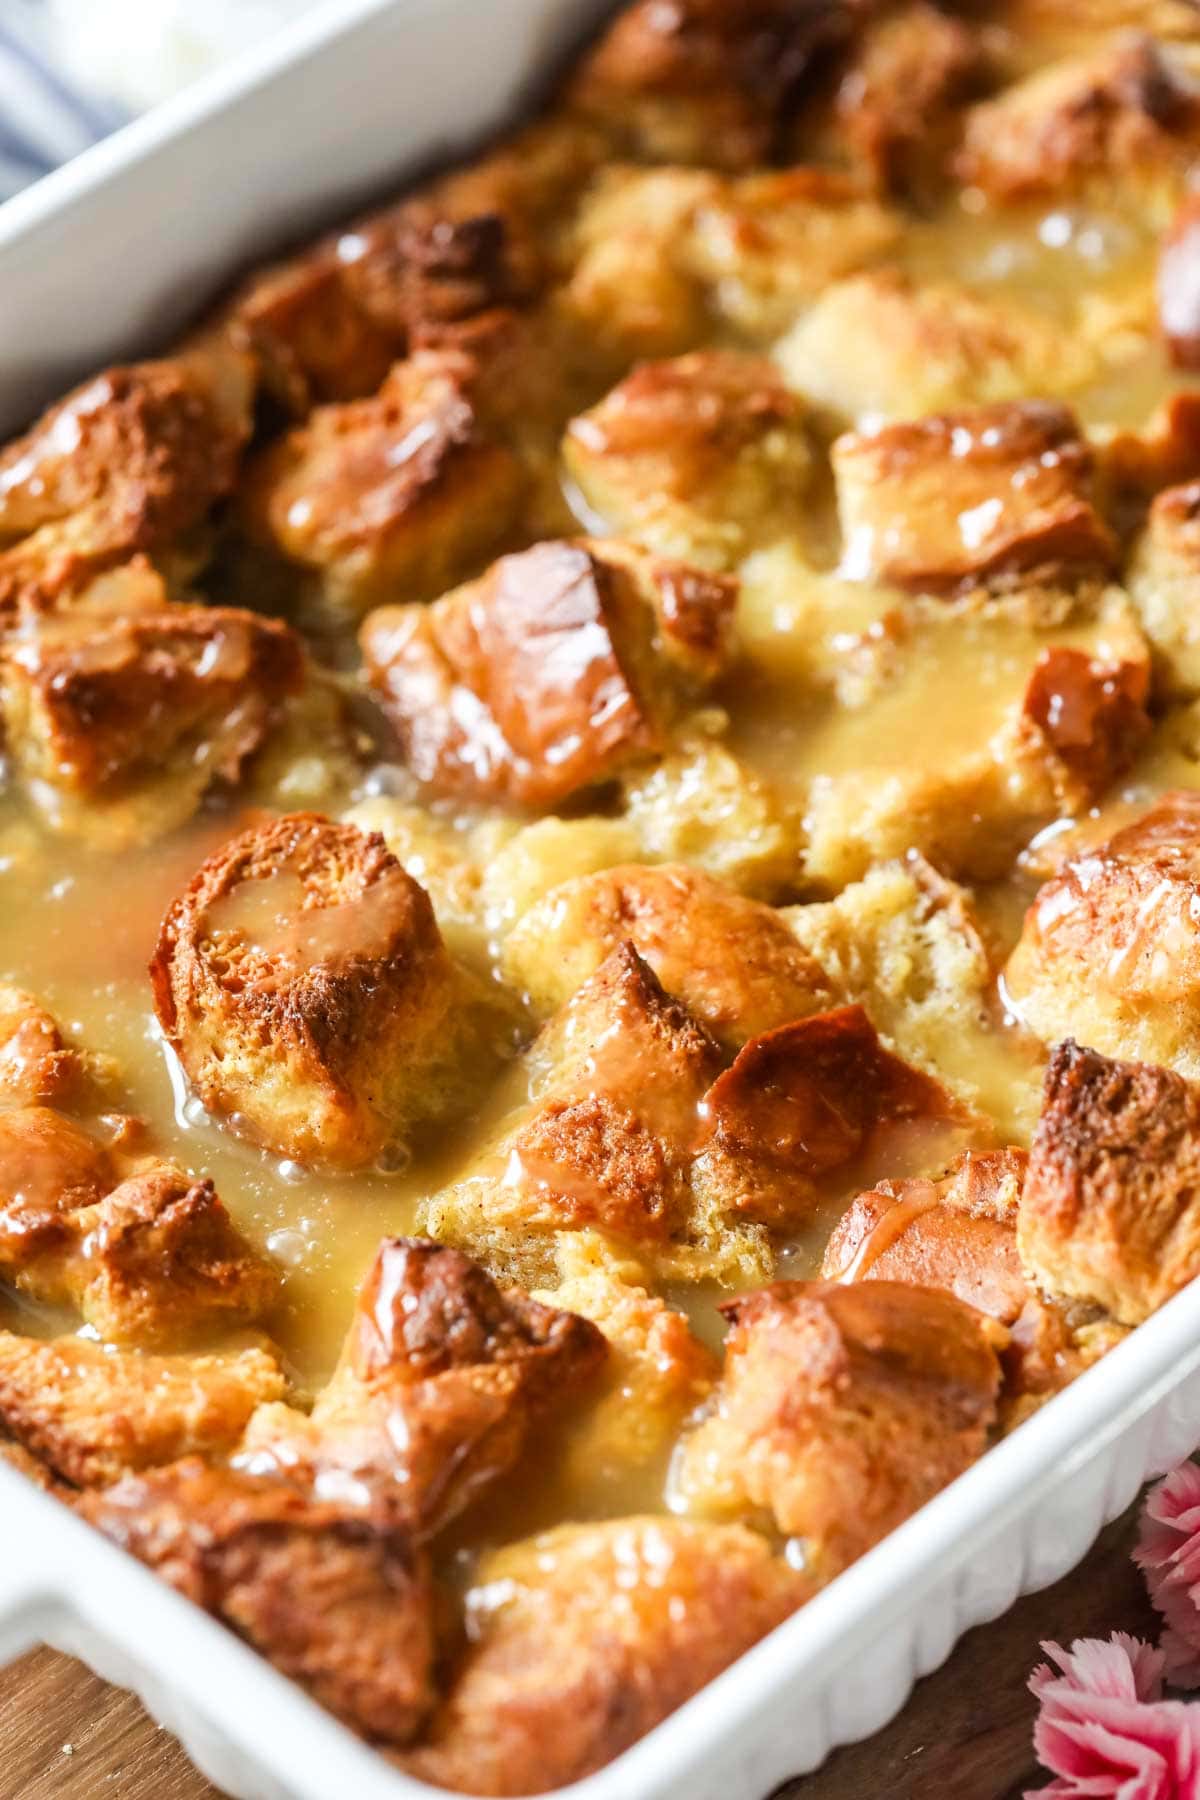 Bread custard pudding that's been drizzled with a caramel sauce.